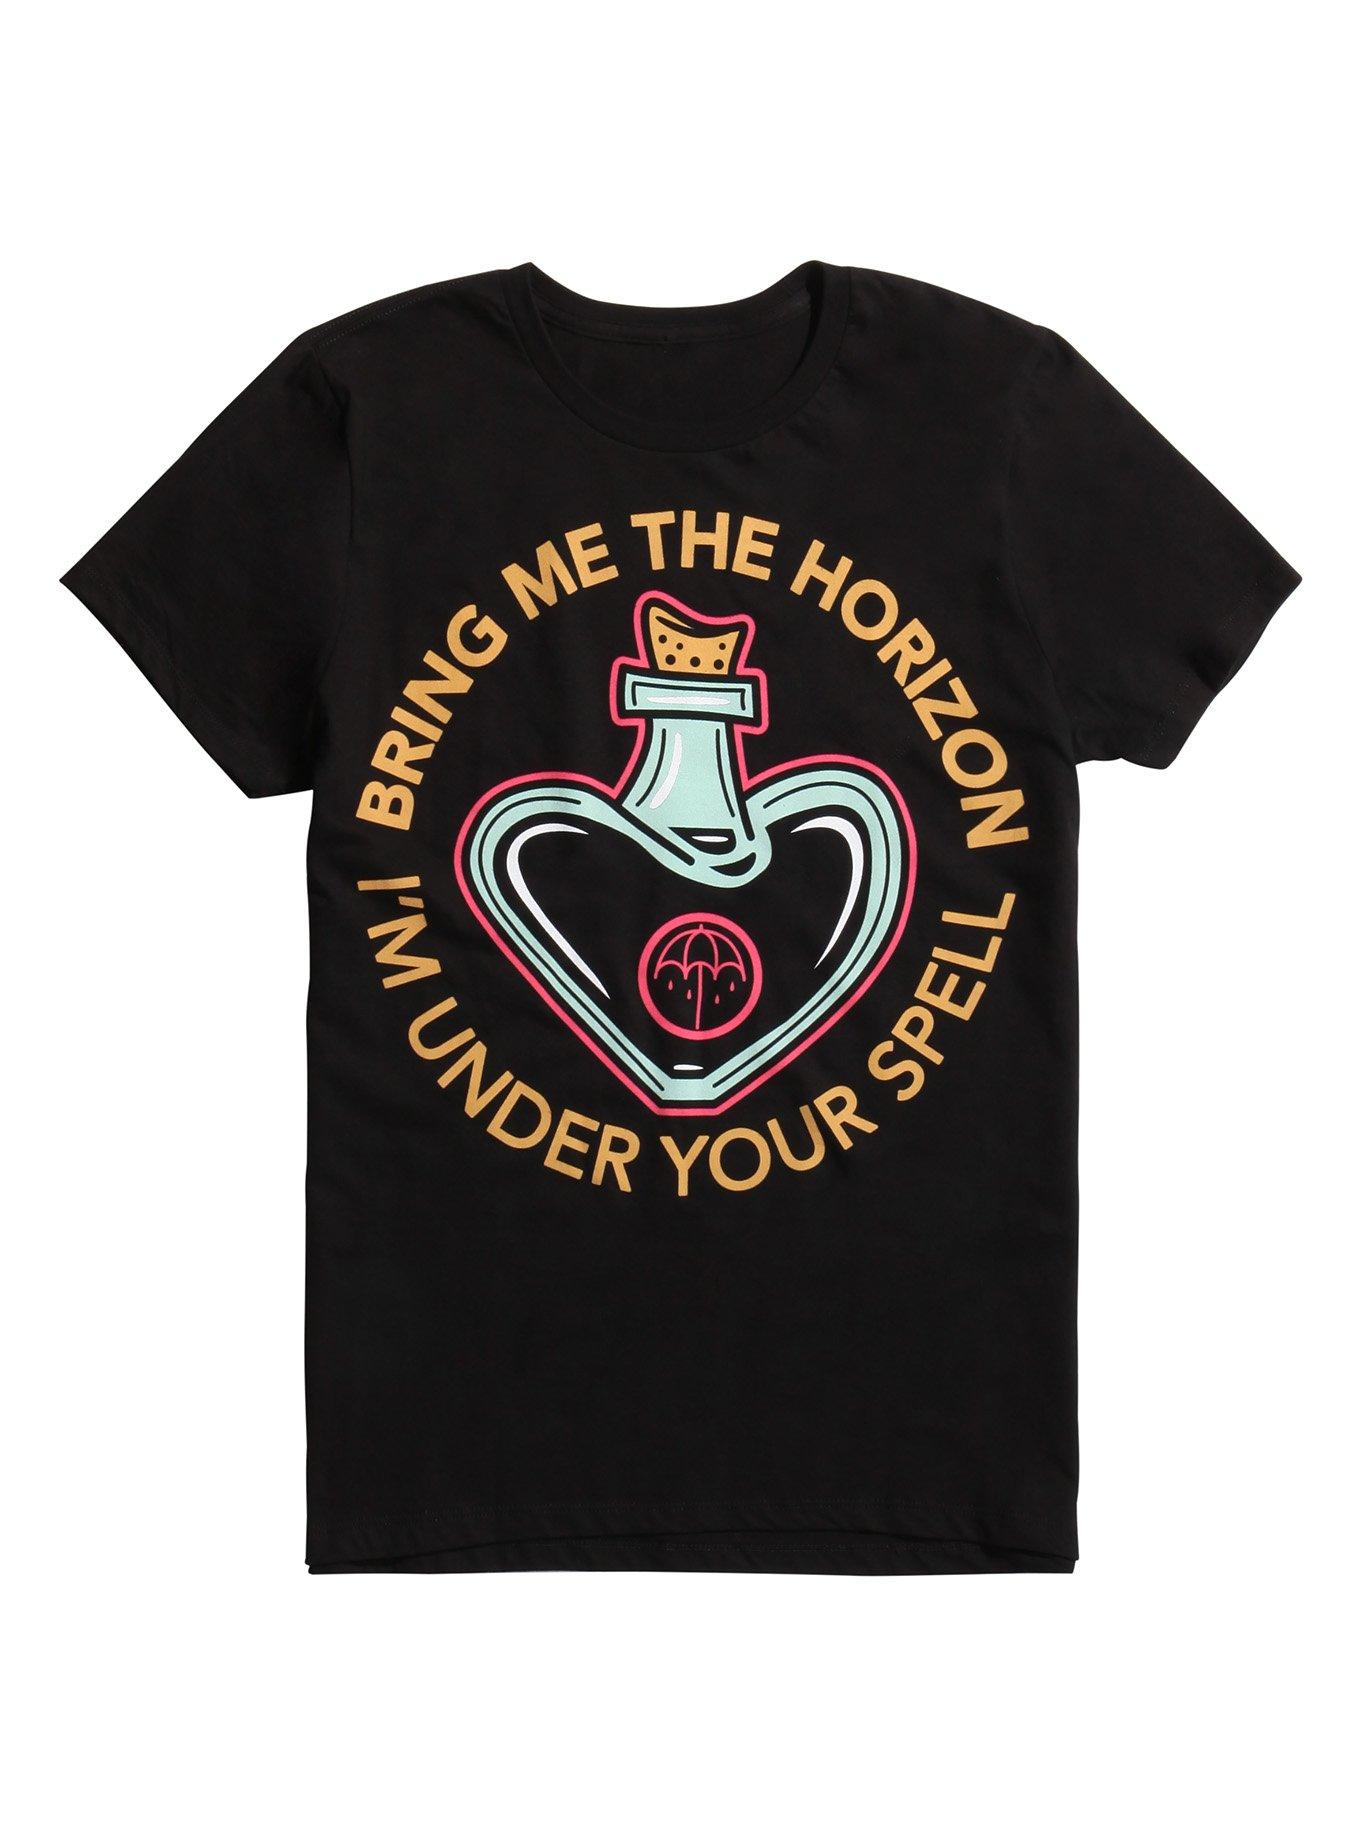 Bring Me The Horizon Under Your Spell T-Shirt, BLACK, hi-res